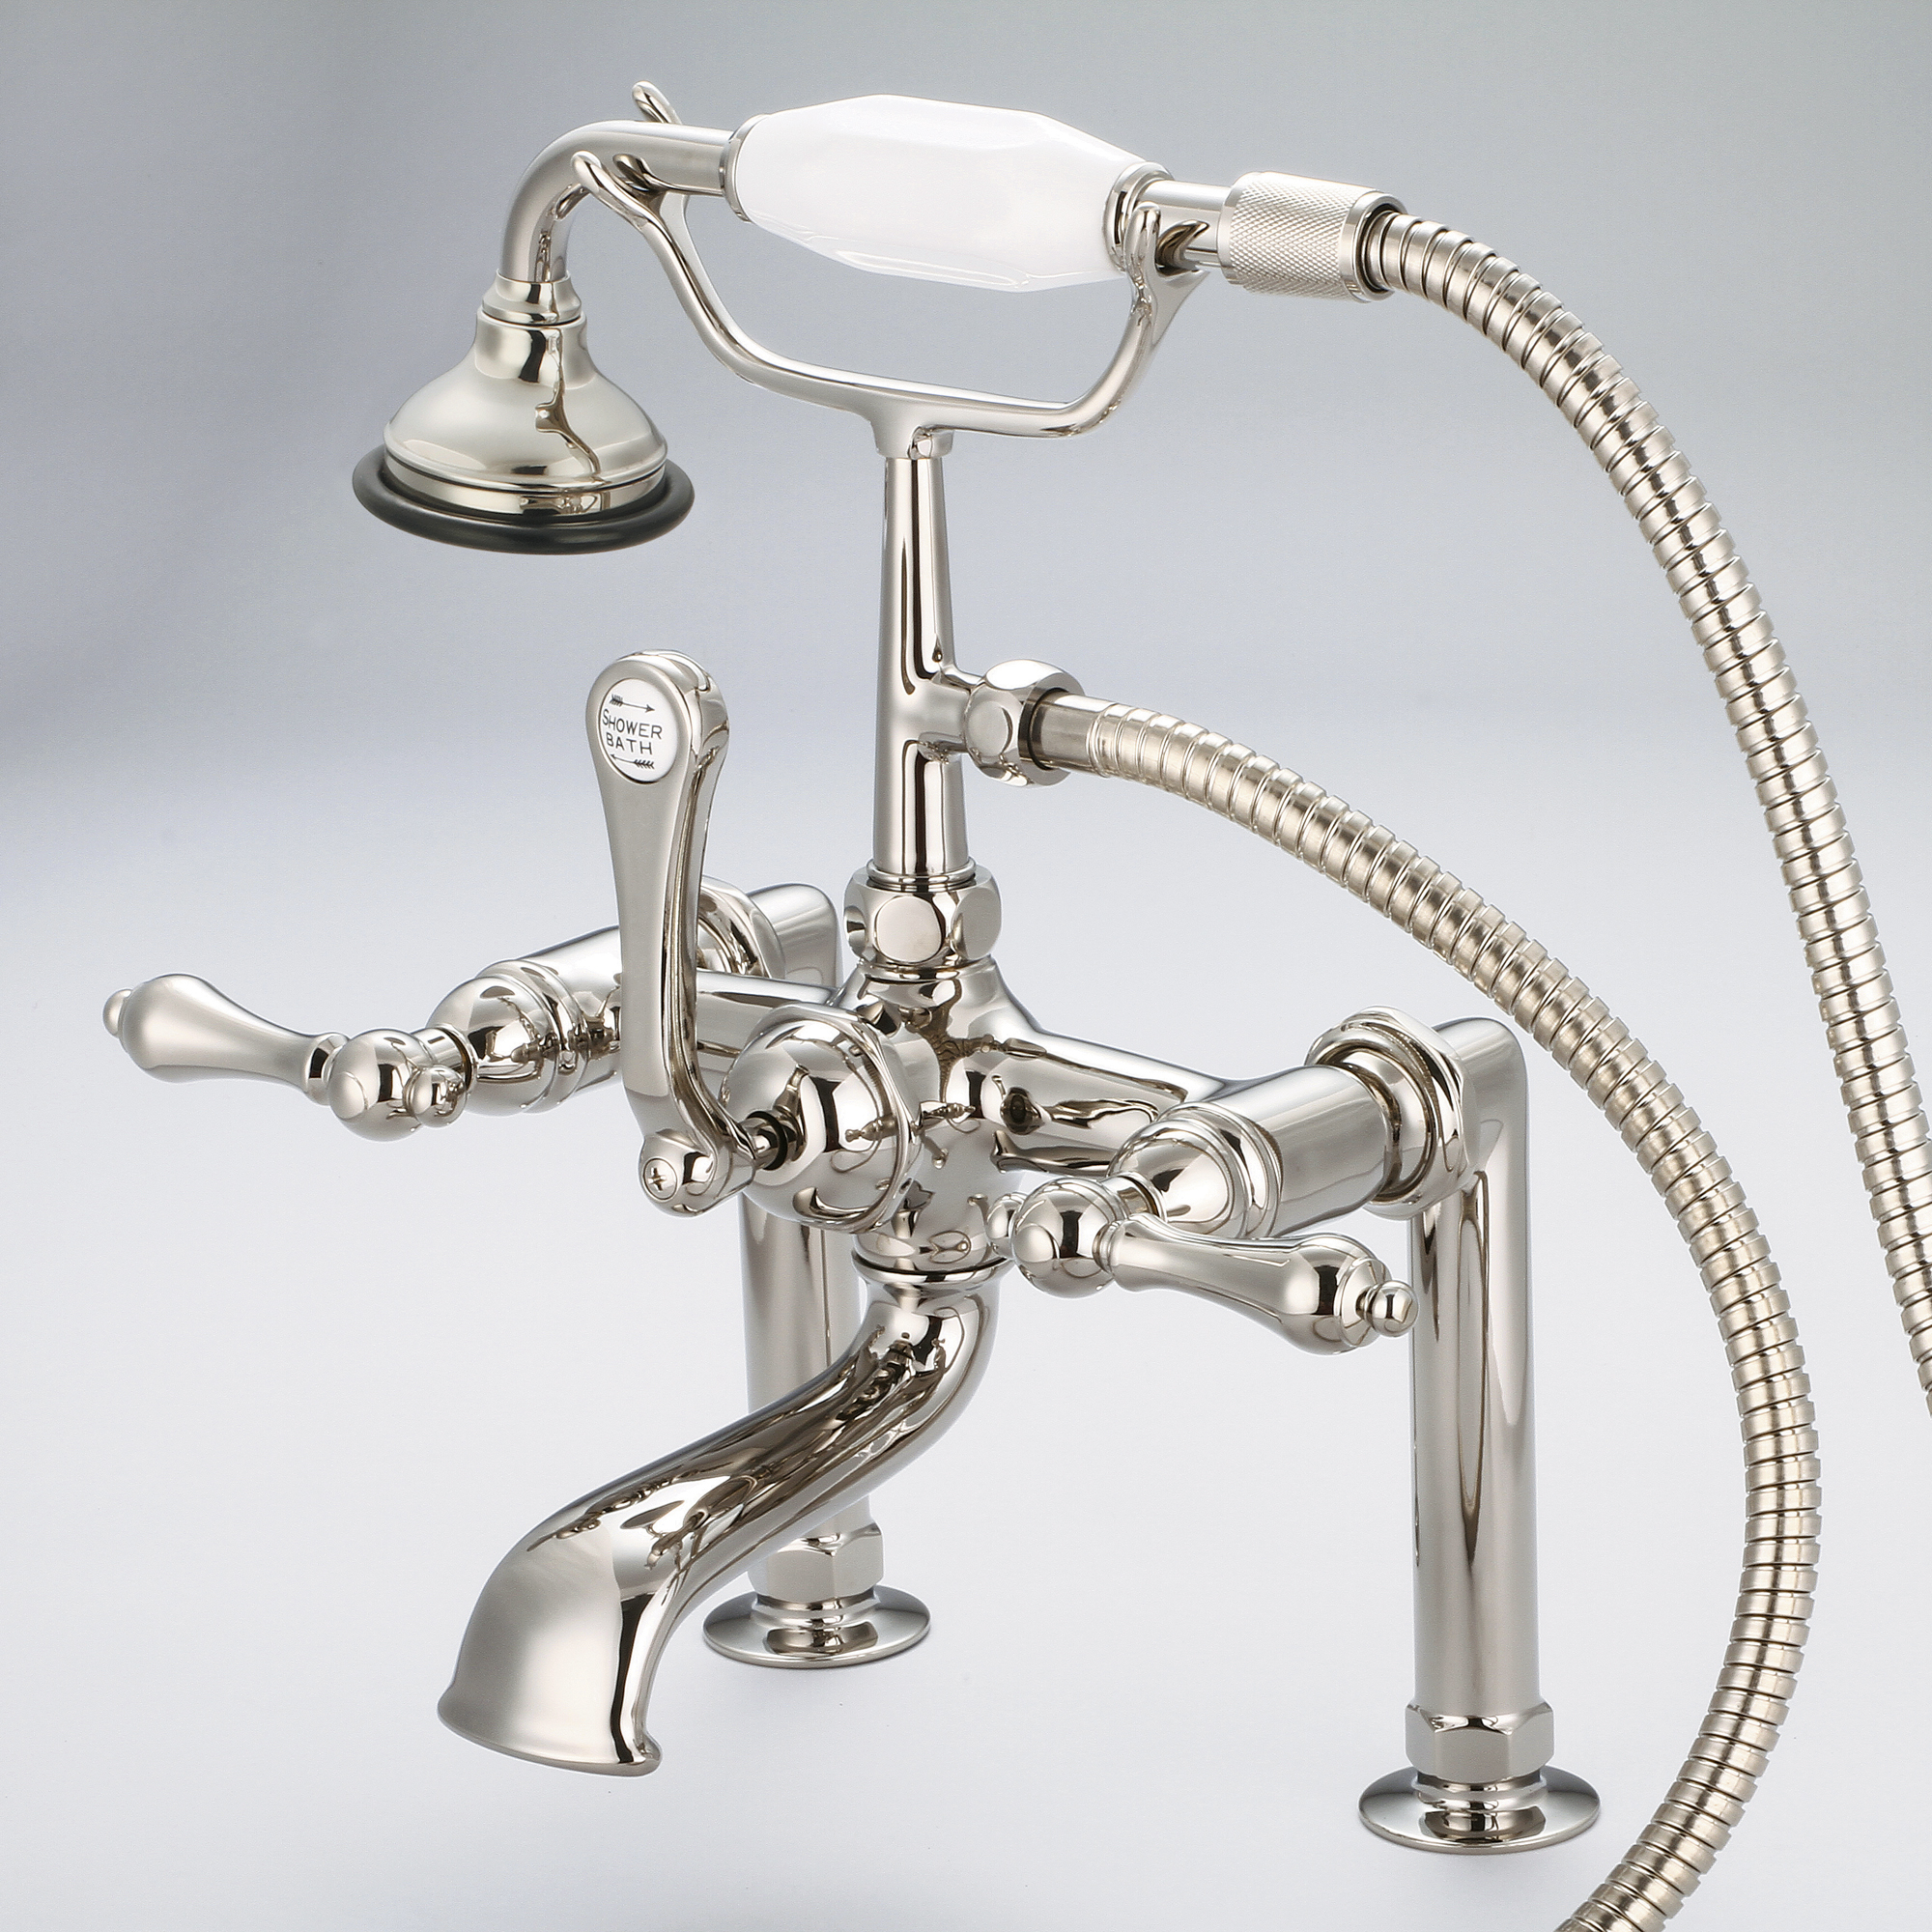 Vintage Classic 7 Inch Spread Deck Mount Tub Faucet With 6 Inch Risers & Handheld Shower in Polished Nickel (PVD) Finish With Metal Lever Handles Without Labels